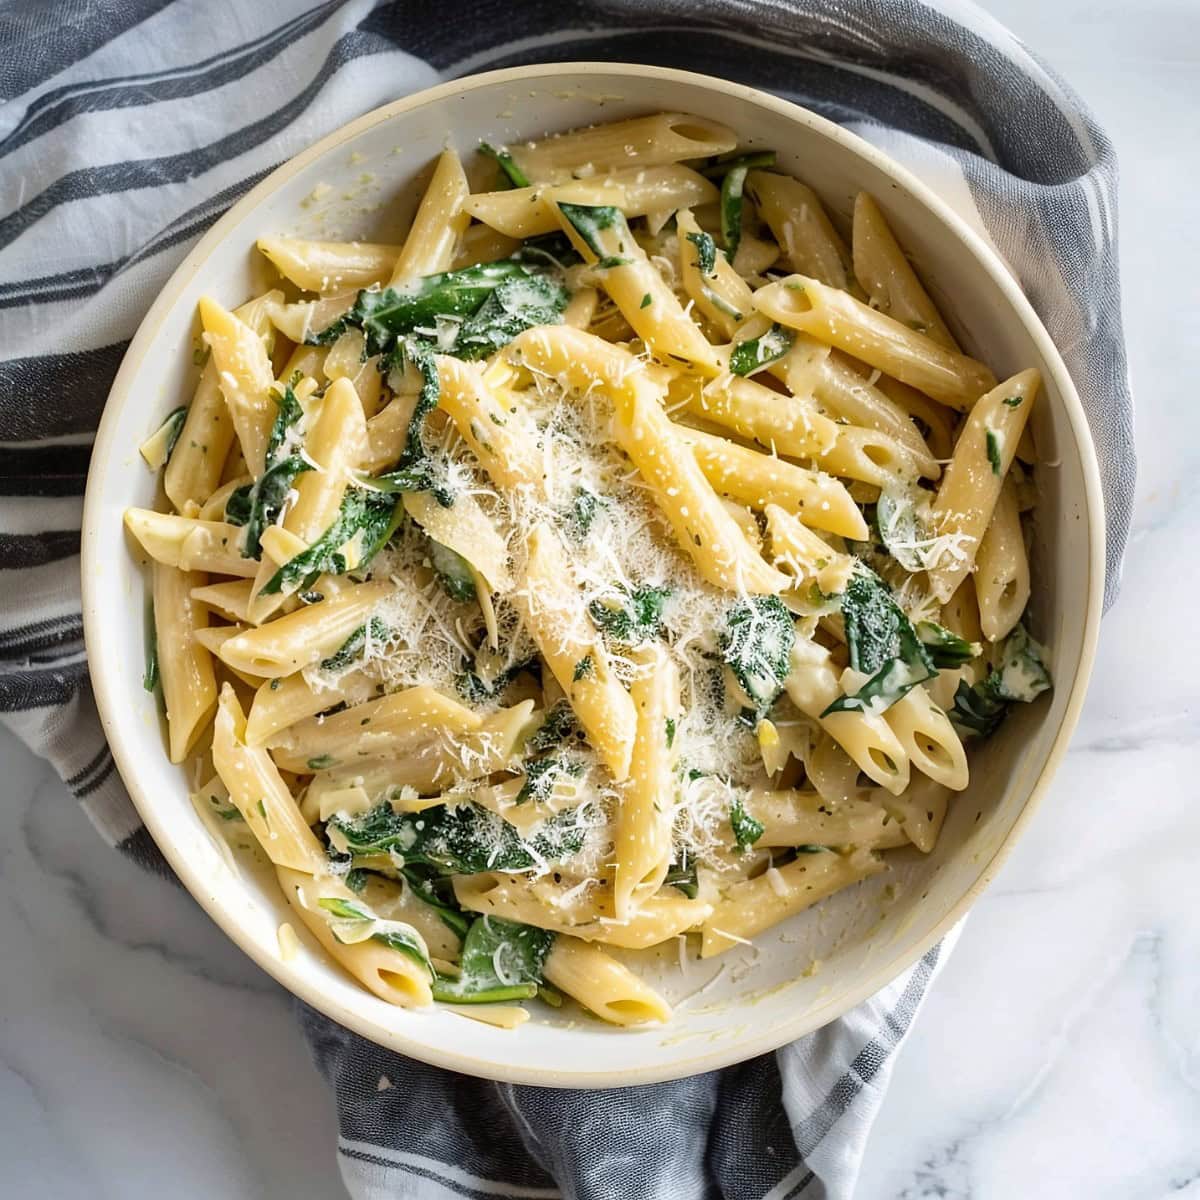 Delicious and hearty spinach artichoke pasta in a white bowl